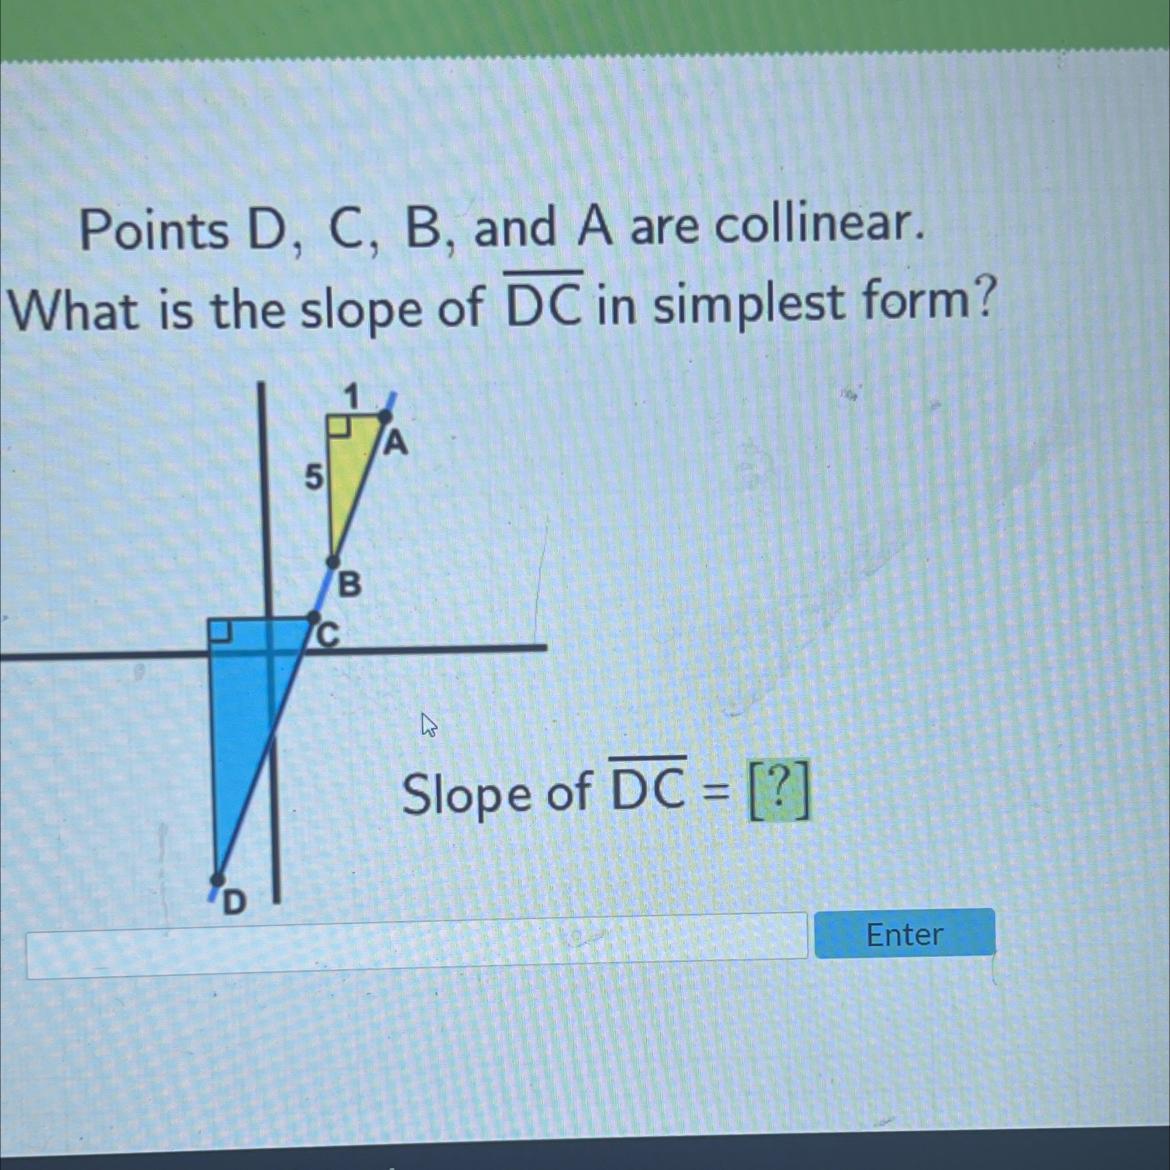 Points D, C, B, And A Are Collinear.What Is The Slope Of DC In Simplest Form?5BSlope Of DC = [?]D